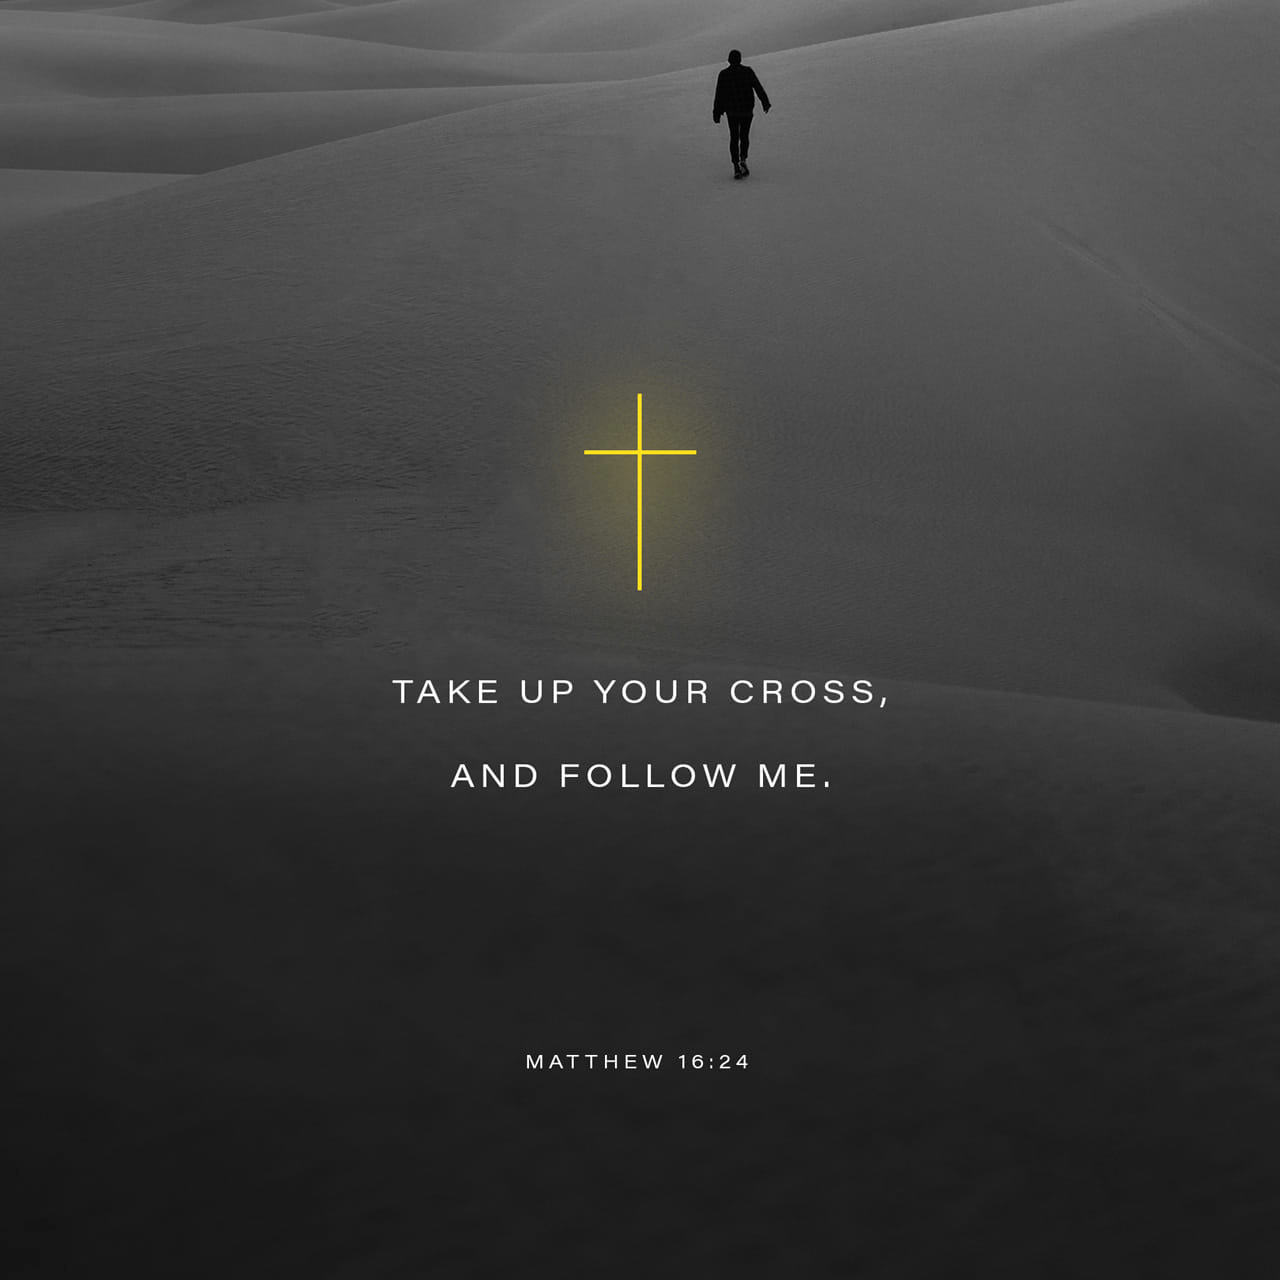 VOTD March 24 - “Then Jesus said to His disciples, “If anyone wishes to come after Me, he must deny himself, and take up his cross and follow Me. For whoever wishes to save his life will lose it; but whoever loses his life for My sake will find it.” ‭‭Matthew‬ ‭16:24-25‬ ‭NASB‬‬